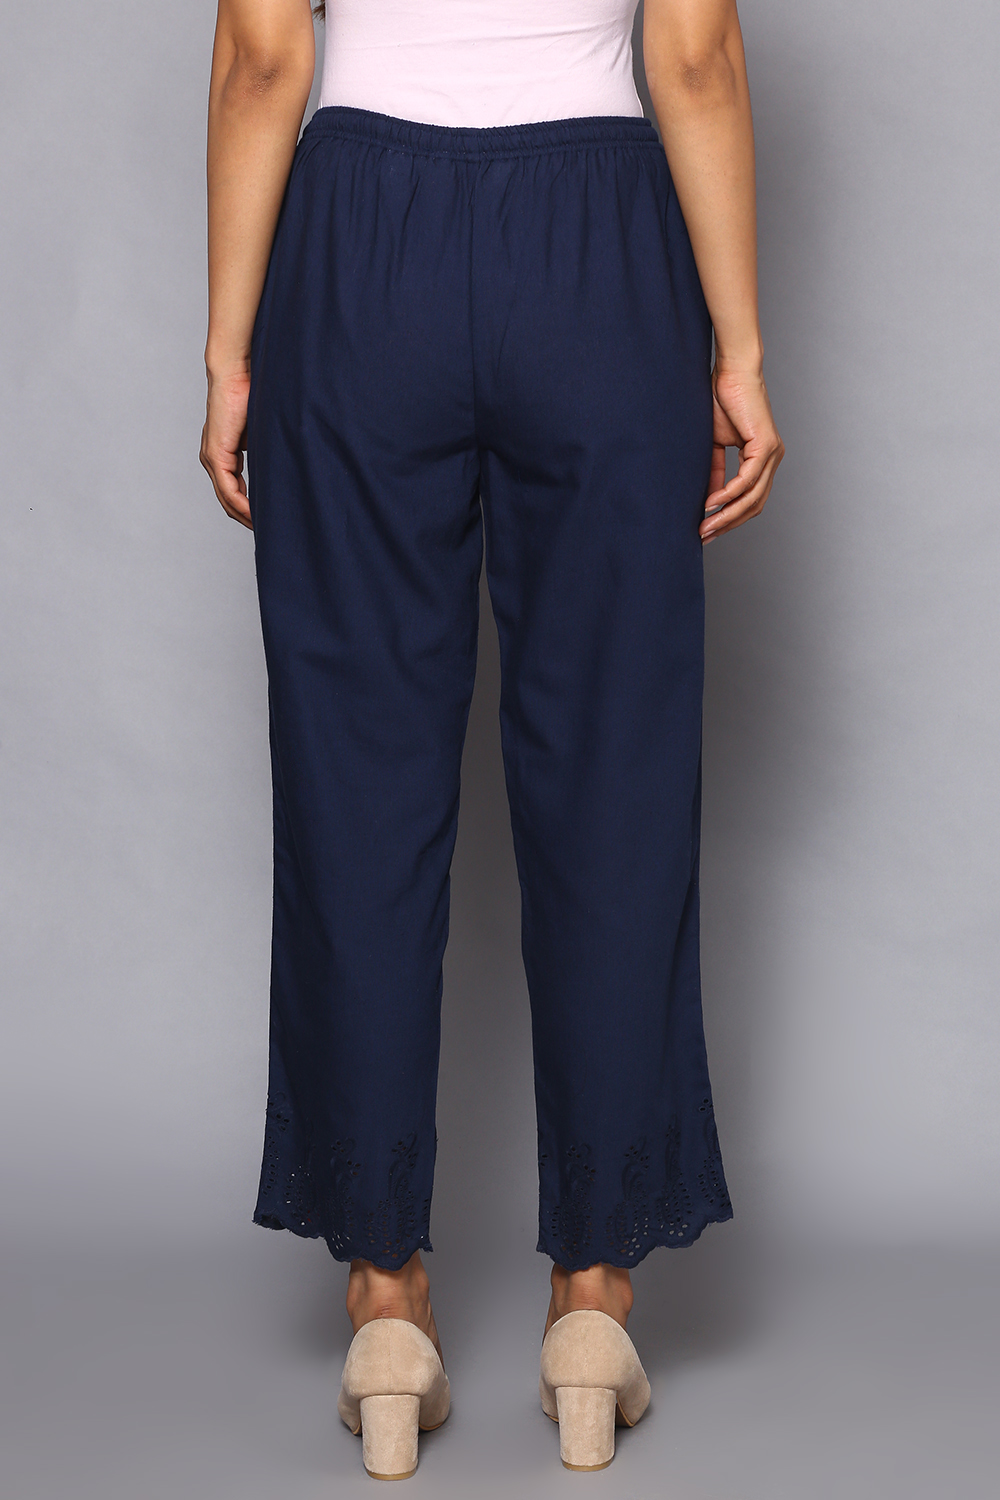 Buy Navy Cotton Ankle Length Pants (Pants) for N/A0.0